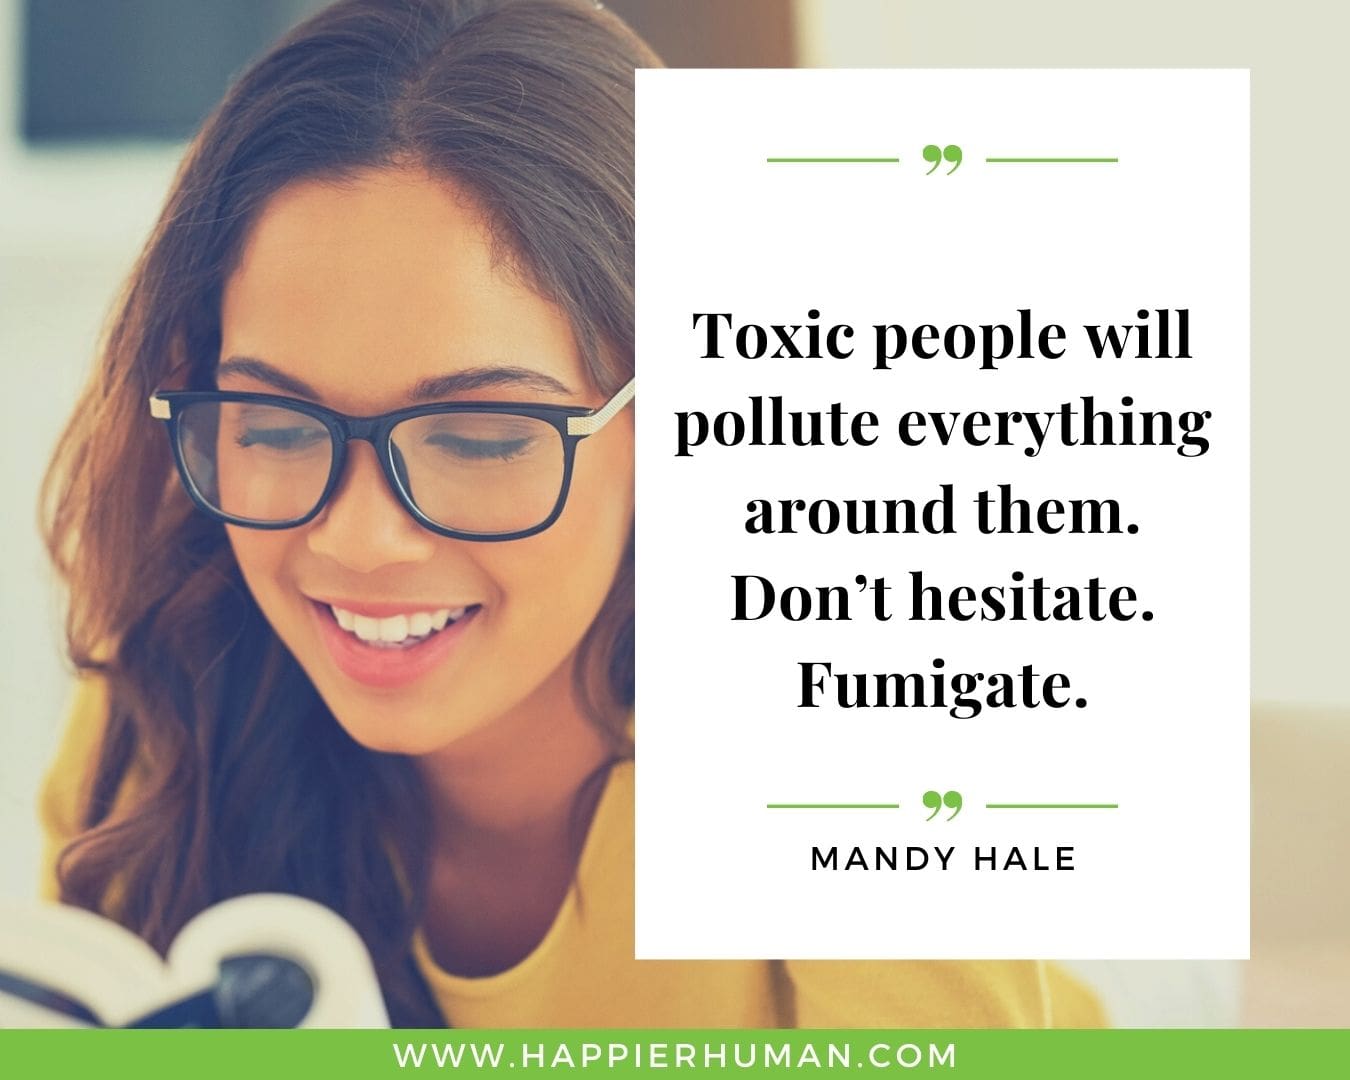 Toxic People Quotes - “Toxic people will pollute everything around them. Don’t hesitate. Fumigate.” – Mandy Hale